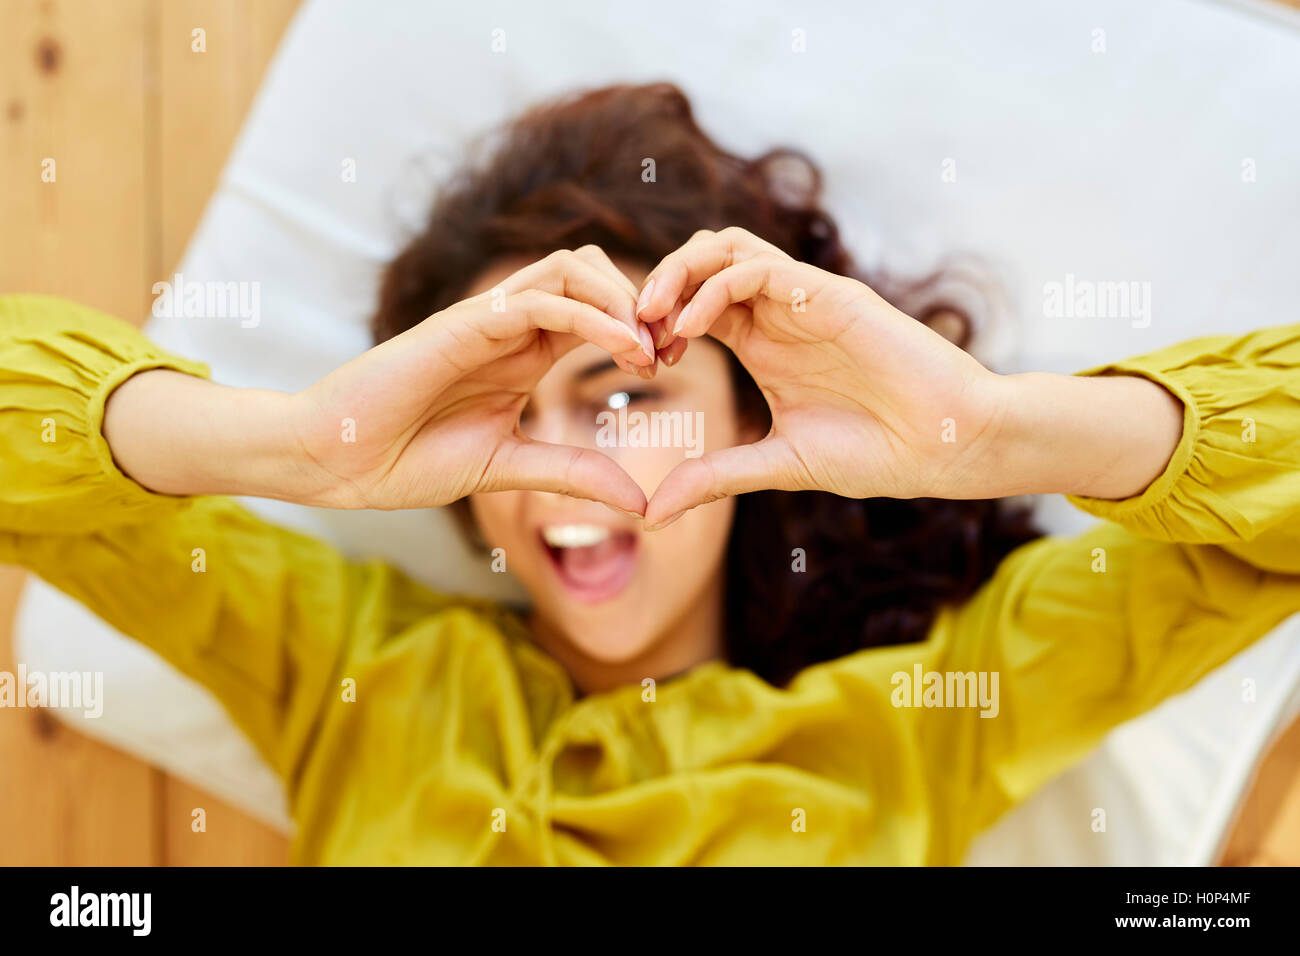 Girl making heart shape with hands Stock Photo